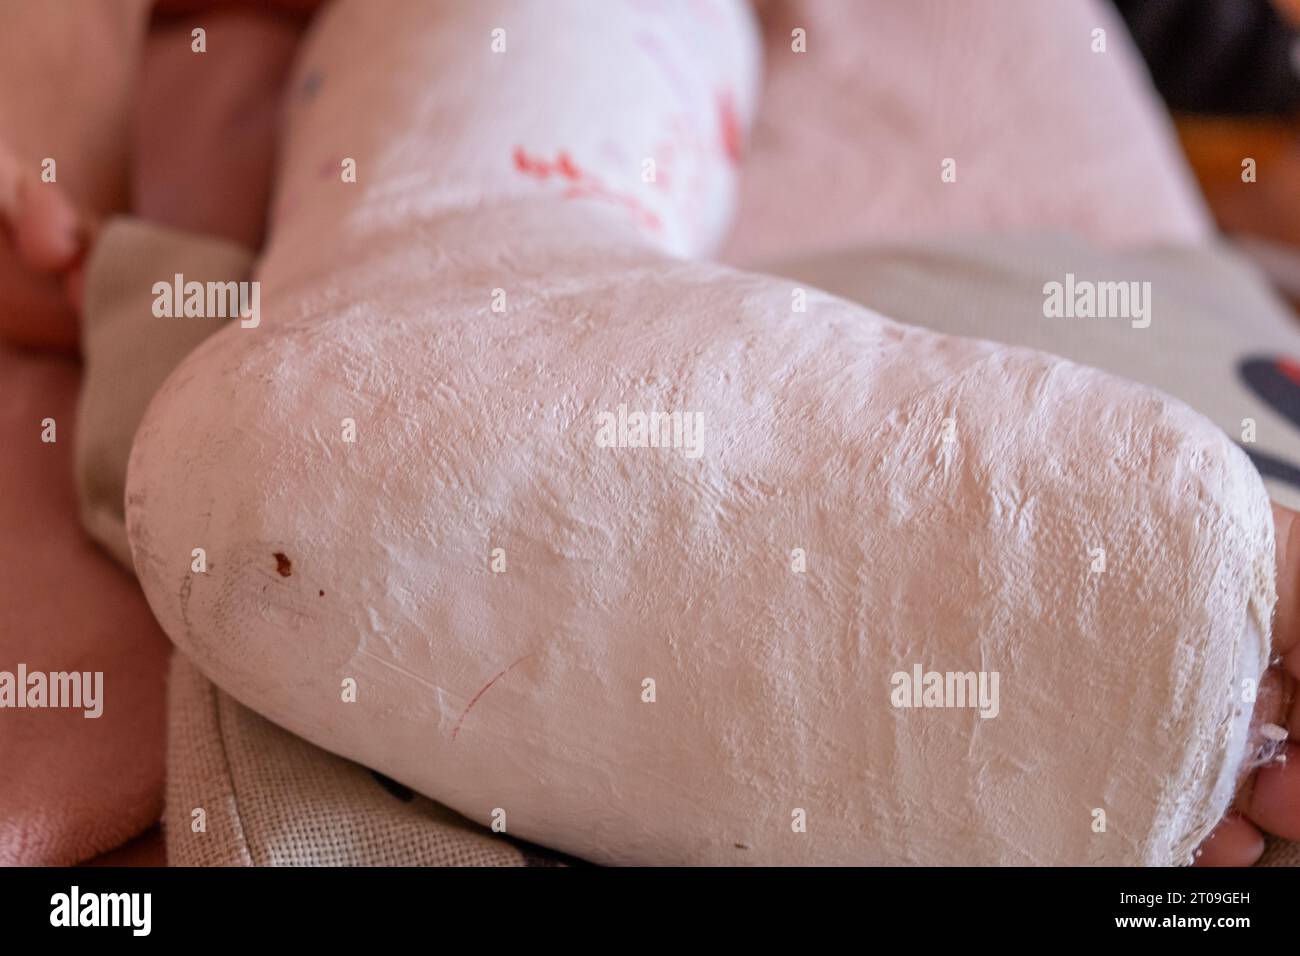 close-up view of a plastered leg Stock Photo